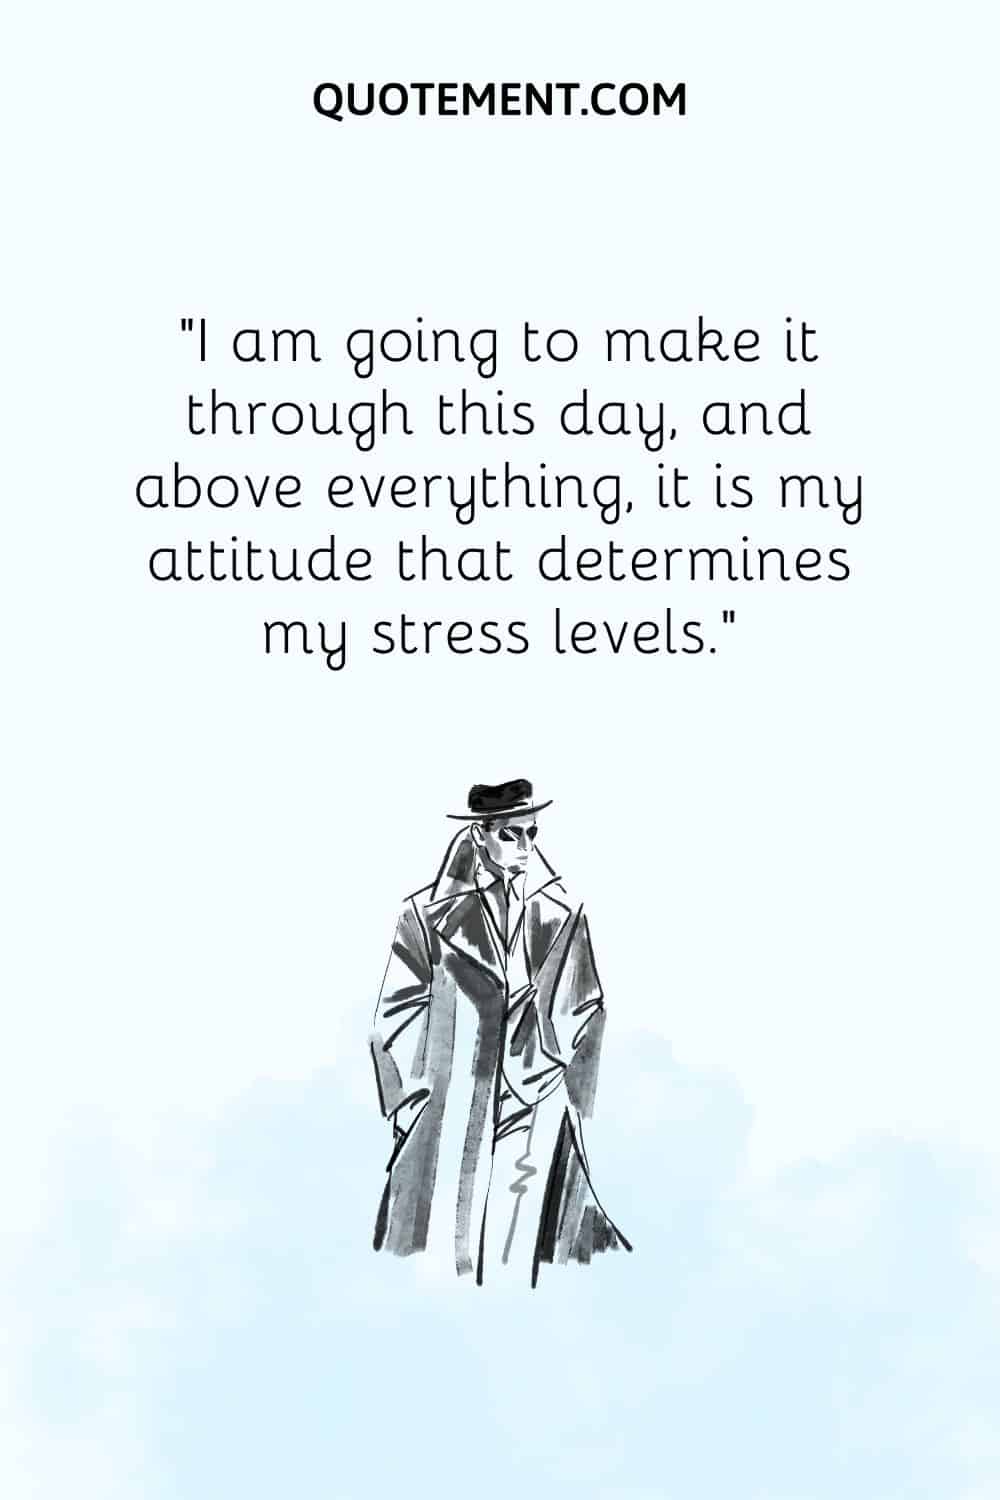 I am going to make it through this day, and above everything, it is my attitude that determines my stress levels